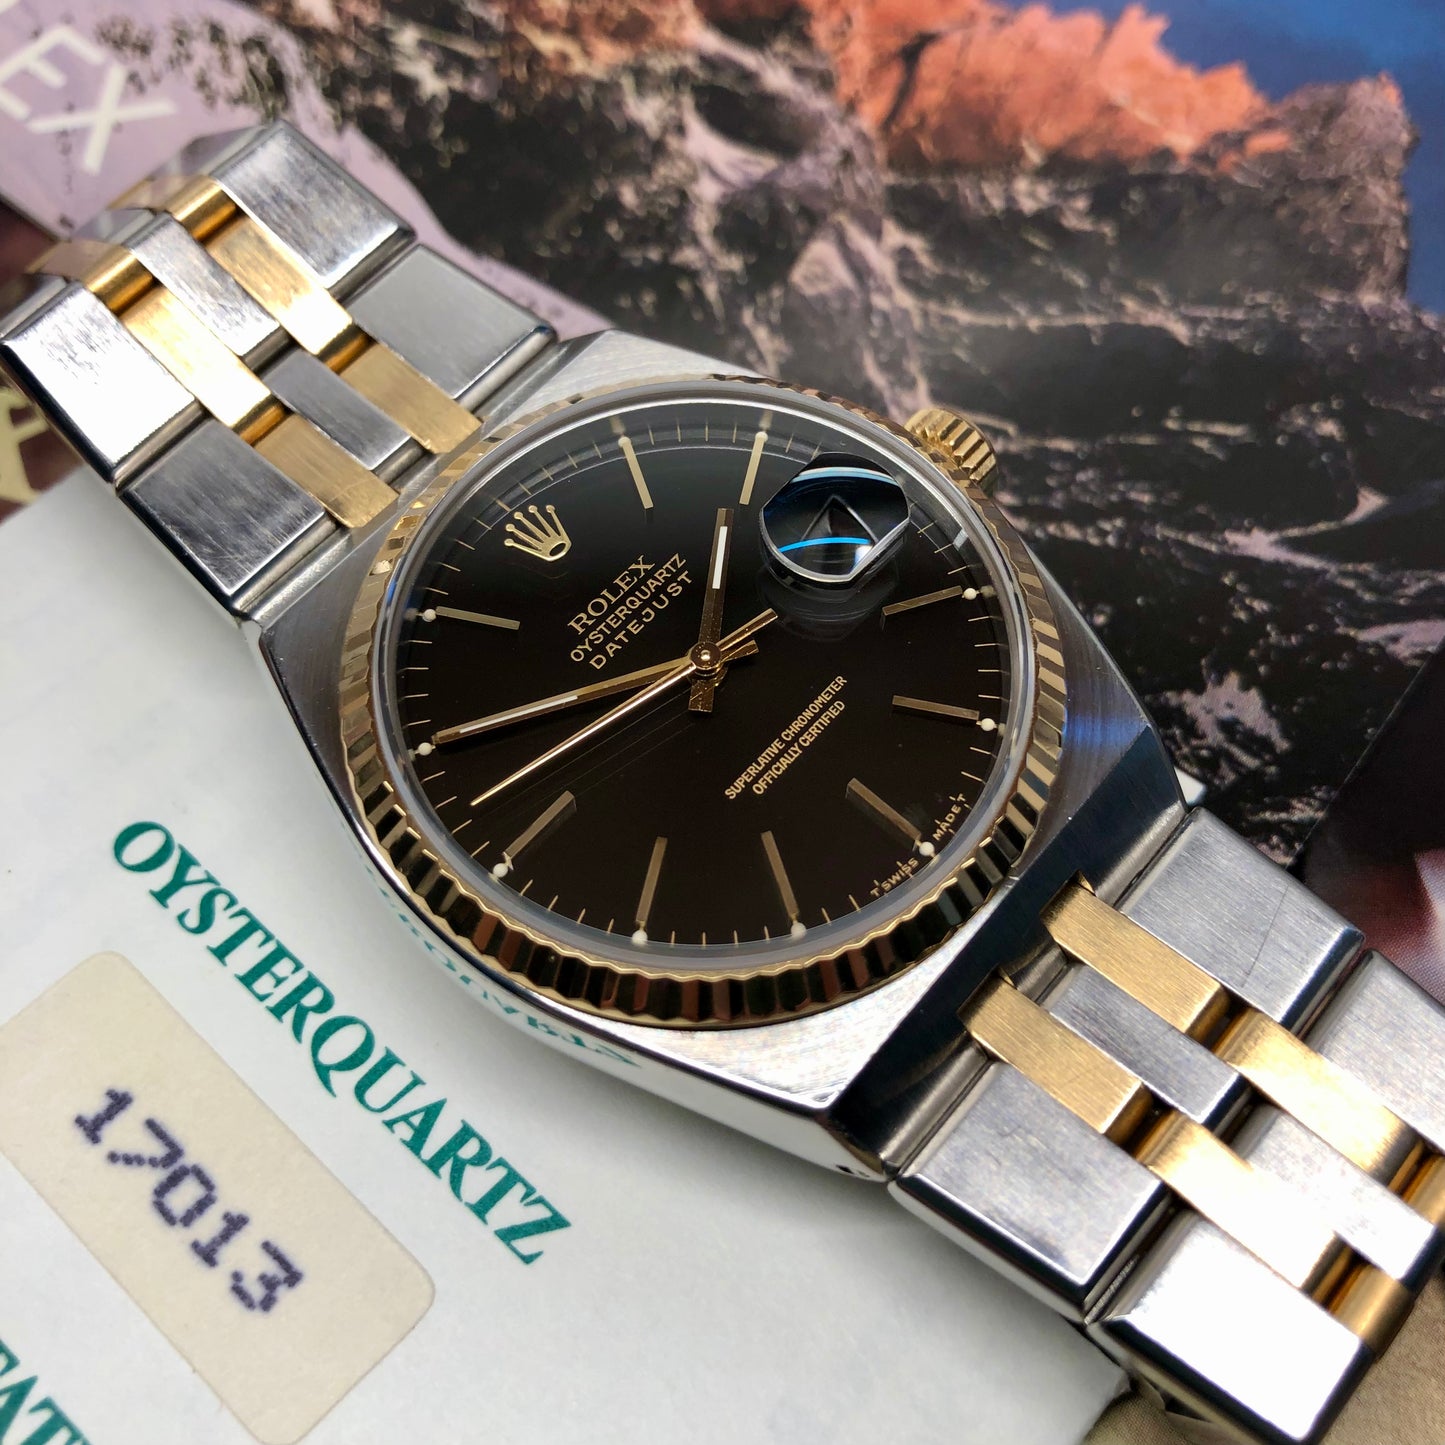 1986 Rolex Datejust Oysterquartz 17013 Black Two Tone Wristwatch with Box Papers - Hashtag Watch Company